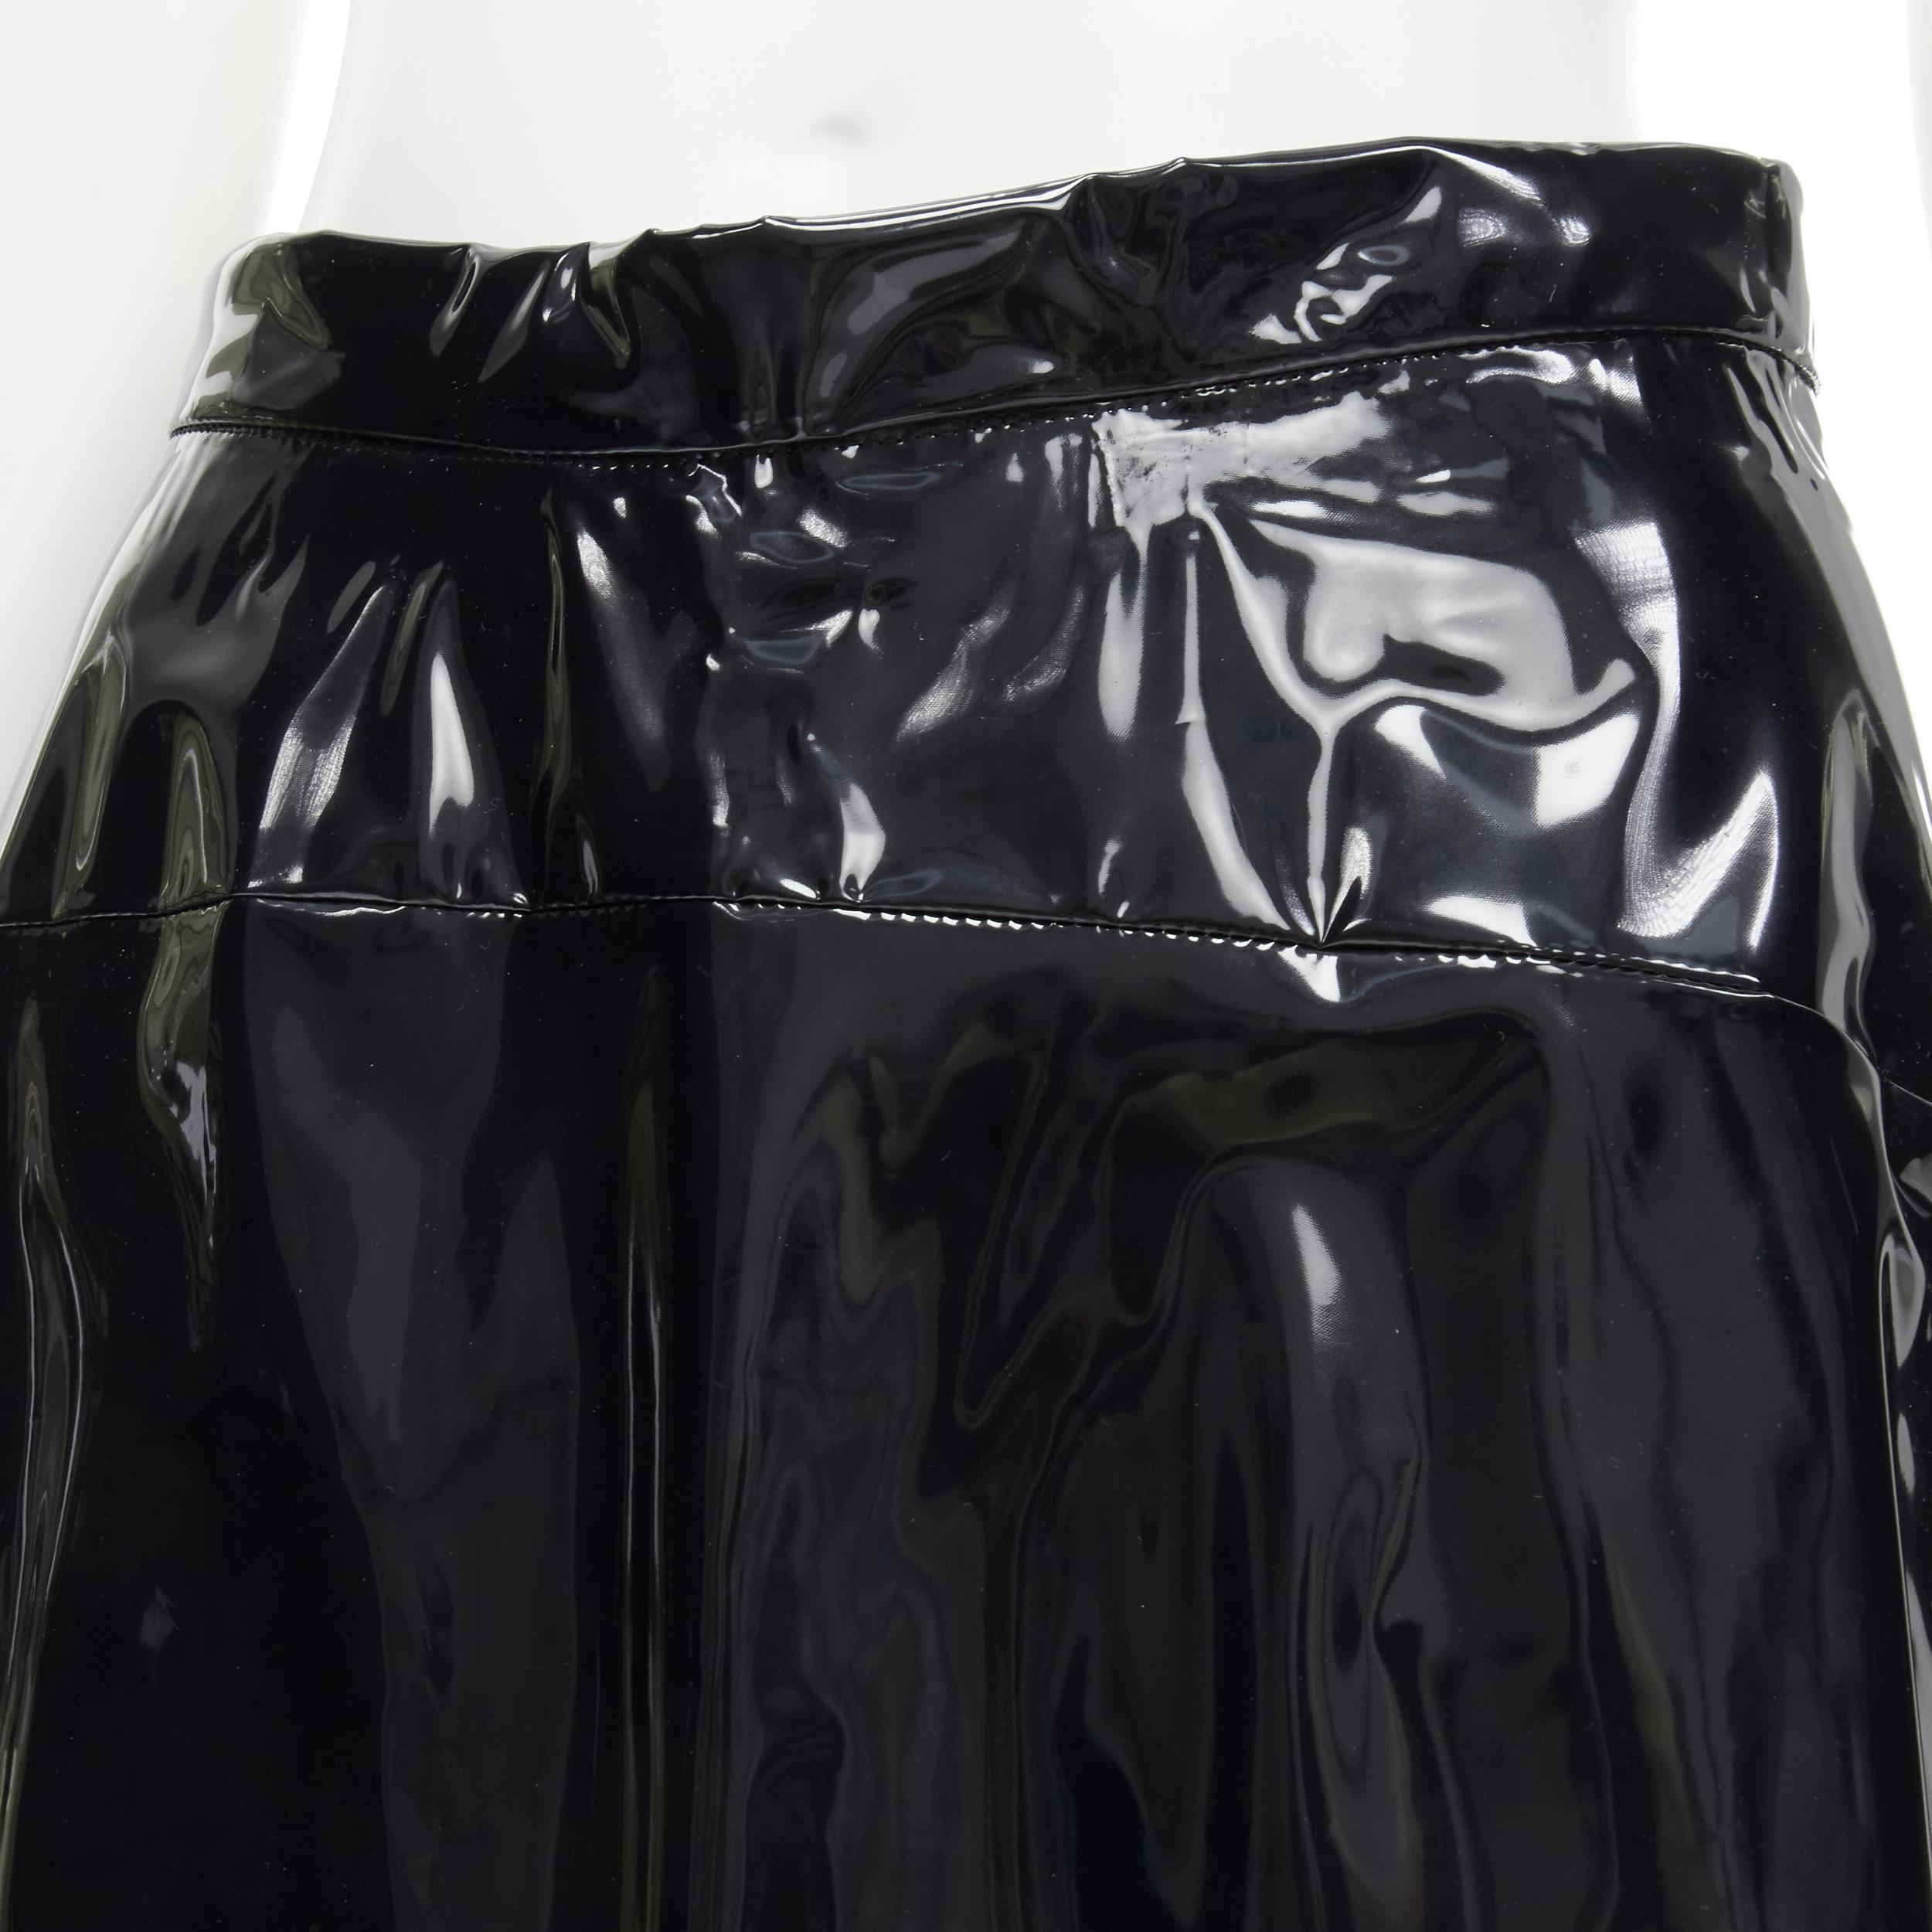 COMME DES GARCONS 1991 black vinyl plastic bias cut A-lined flared skirt L
Reference: CRTI/A00509
Brand: Comme Des Garcons
Collection: 1991 
Material: Plastic
Color: Black
Pattern: Solid
Closure: Zip
Extra Detail: Button zip closure. Bias cut. Knee